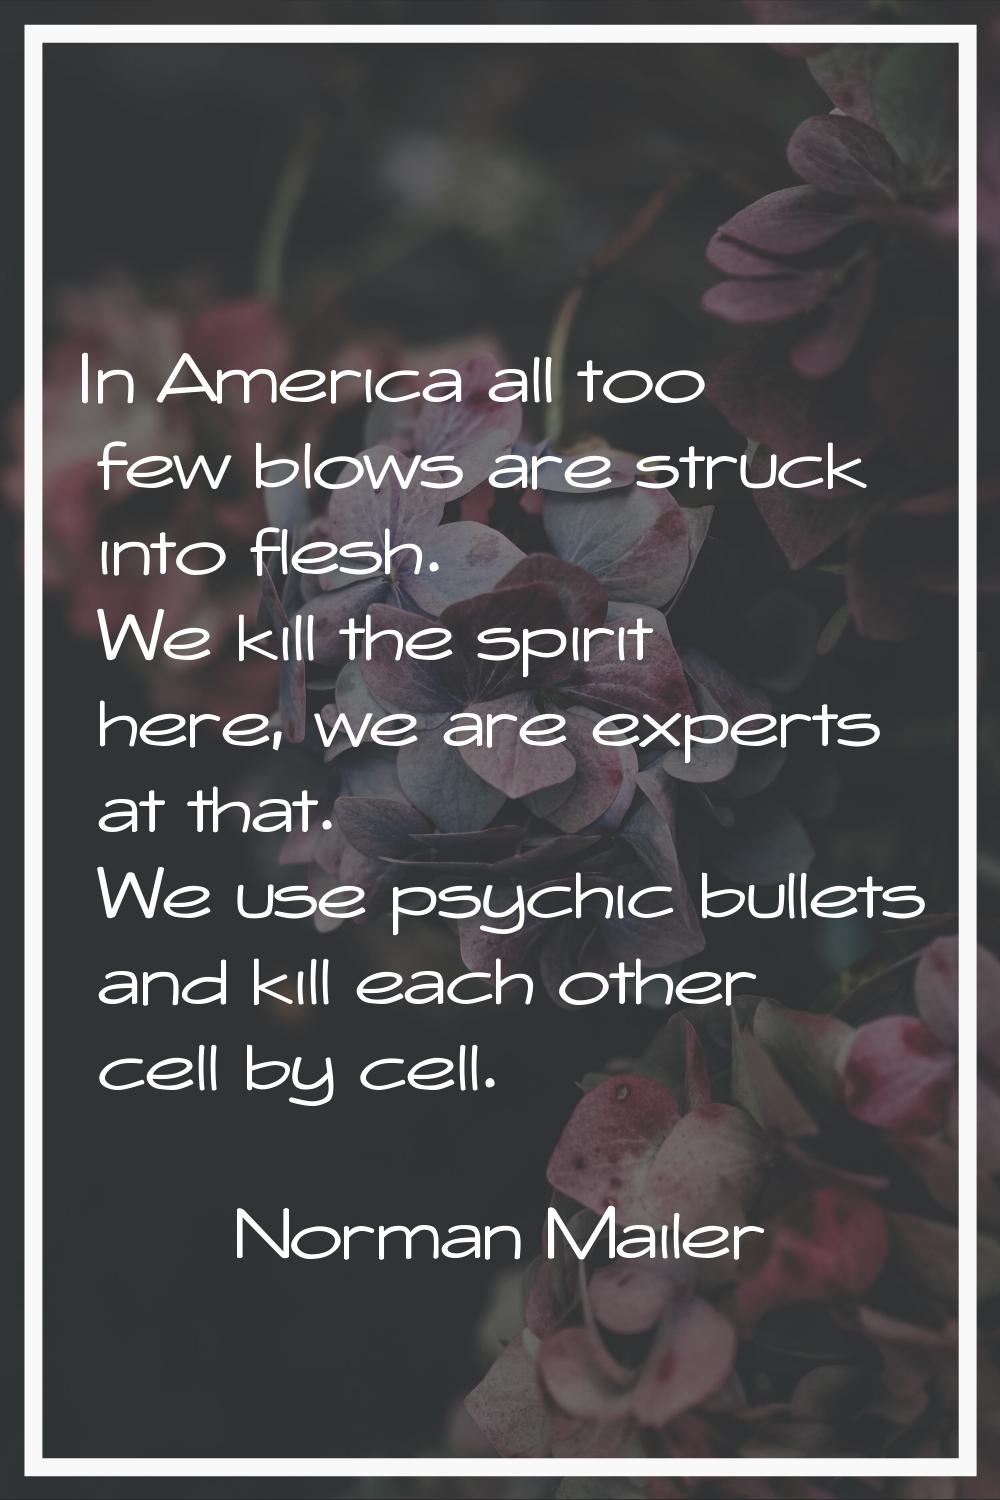 In America all too few blows are struck into flesh. We kill the spirit here, we are experts at that